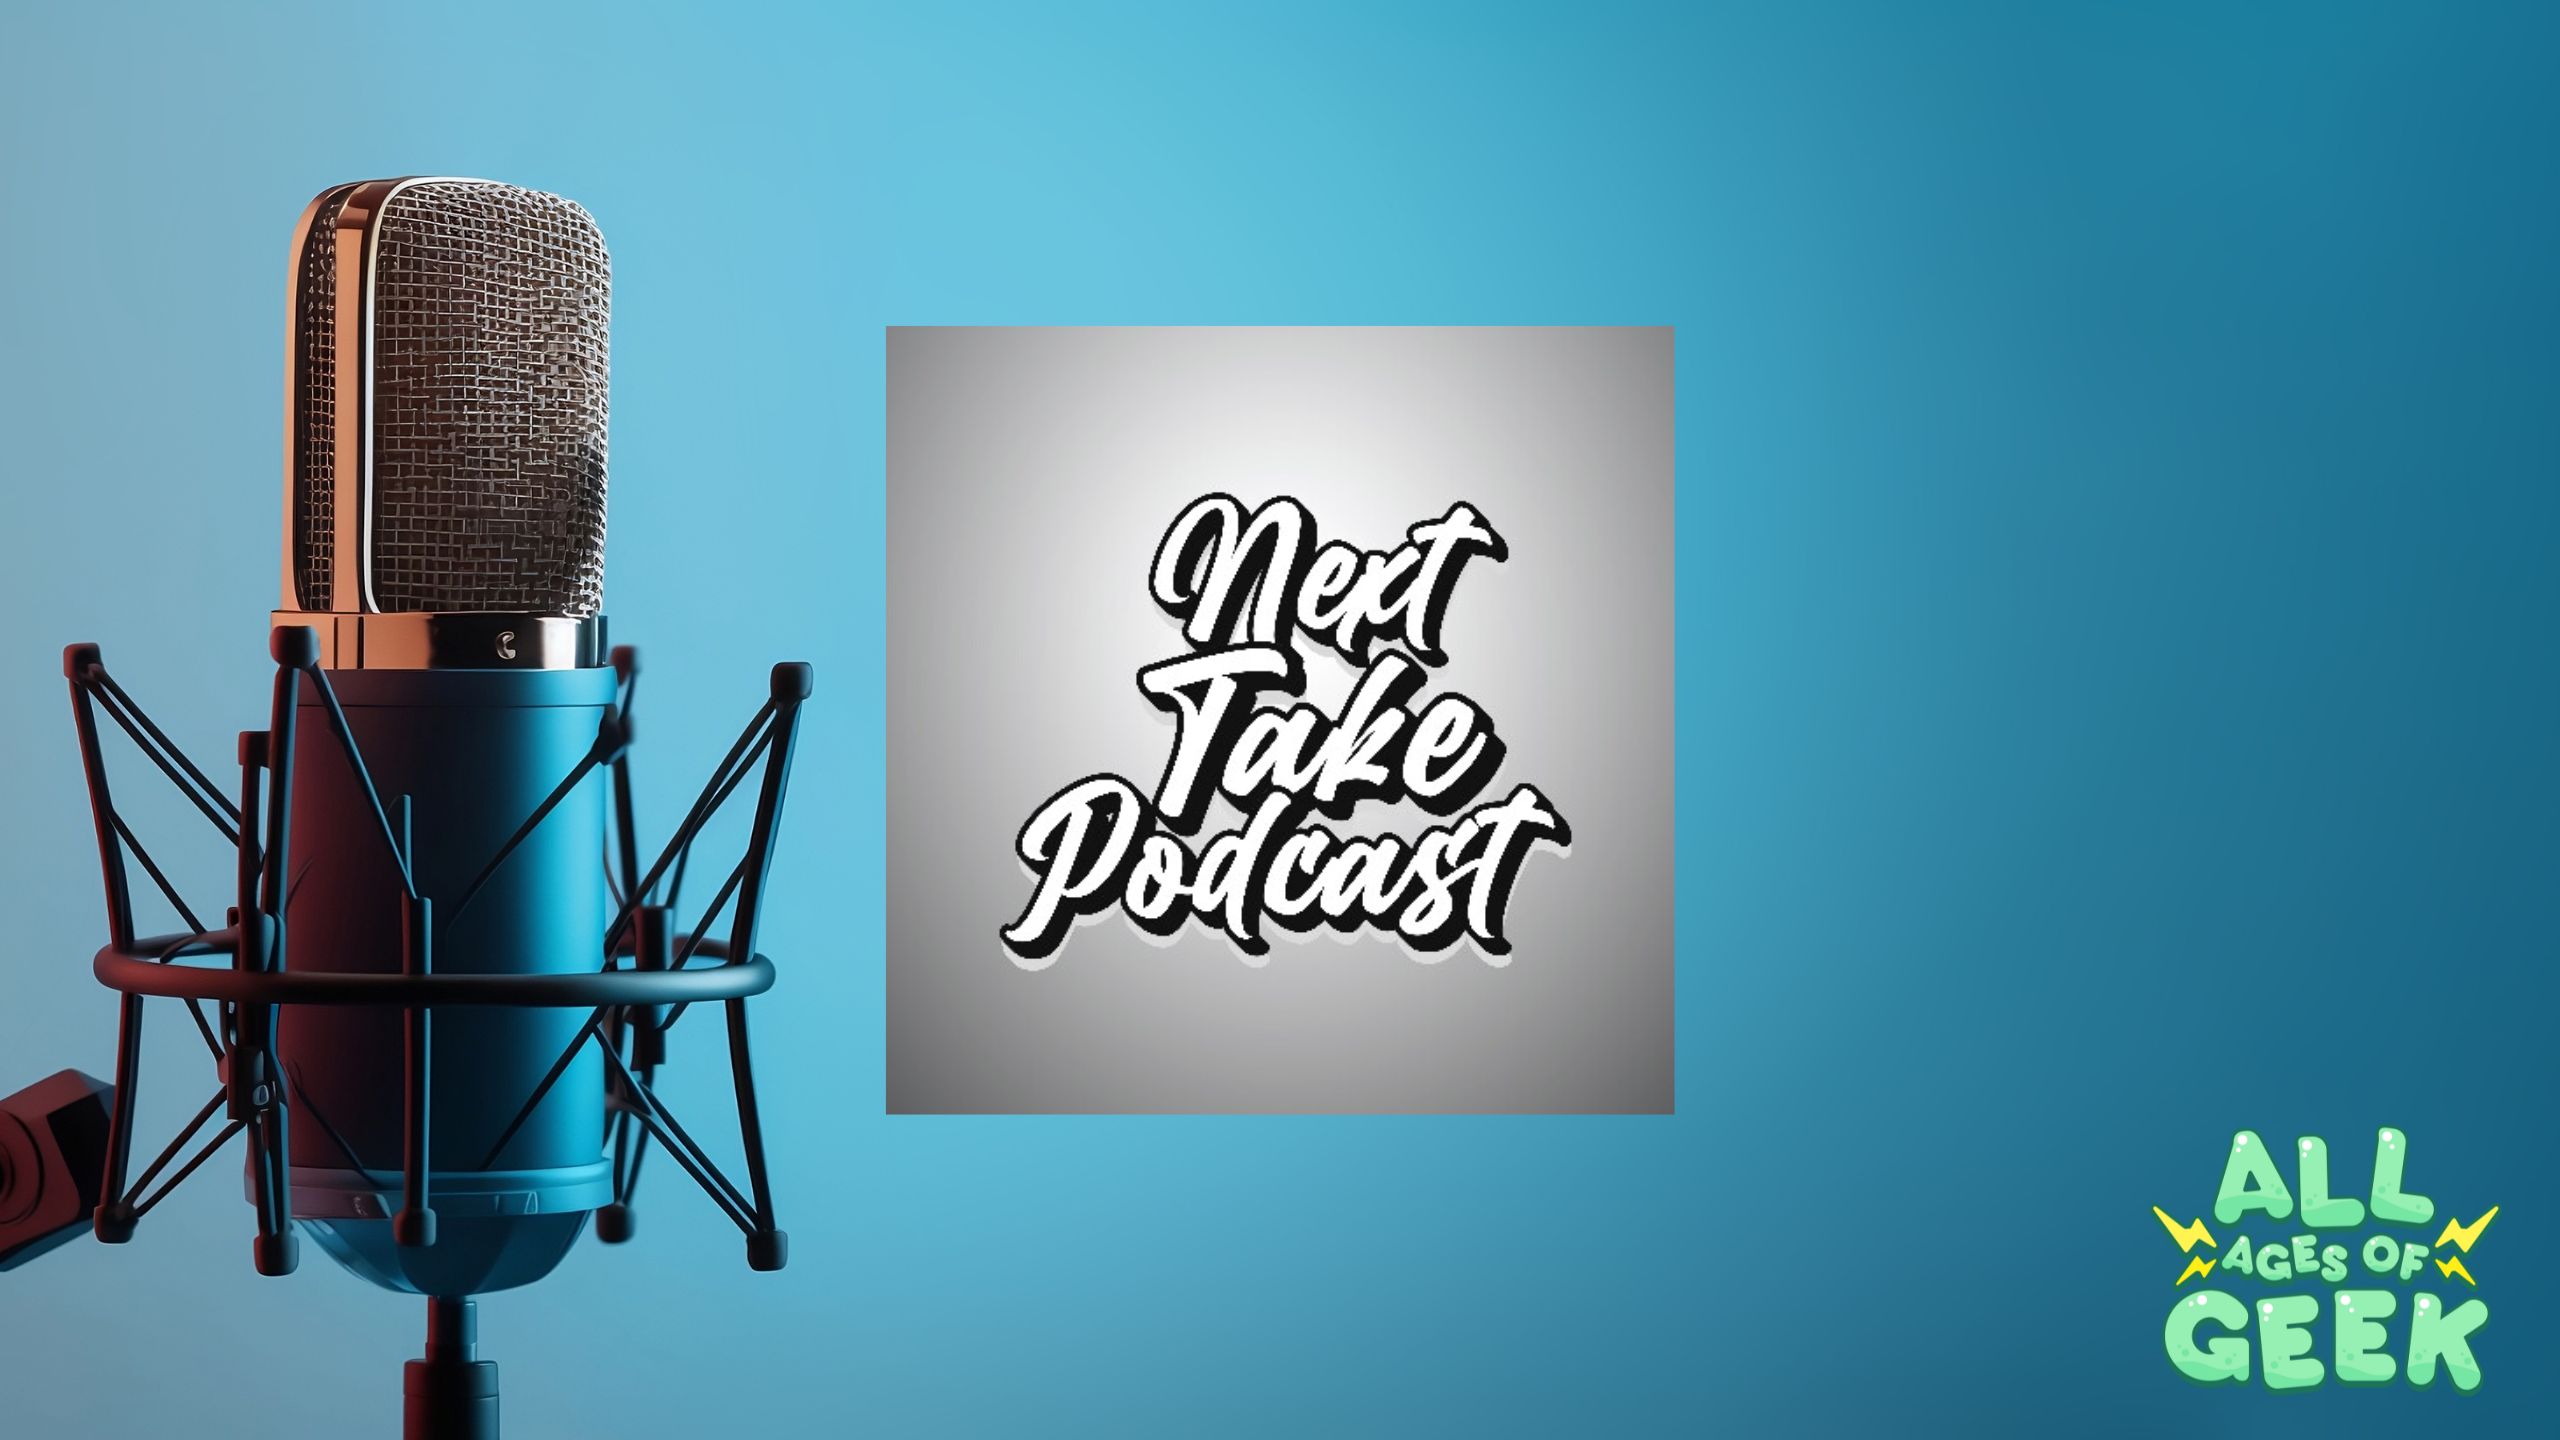 Unpack the World with “Next Take Podcast”